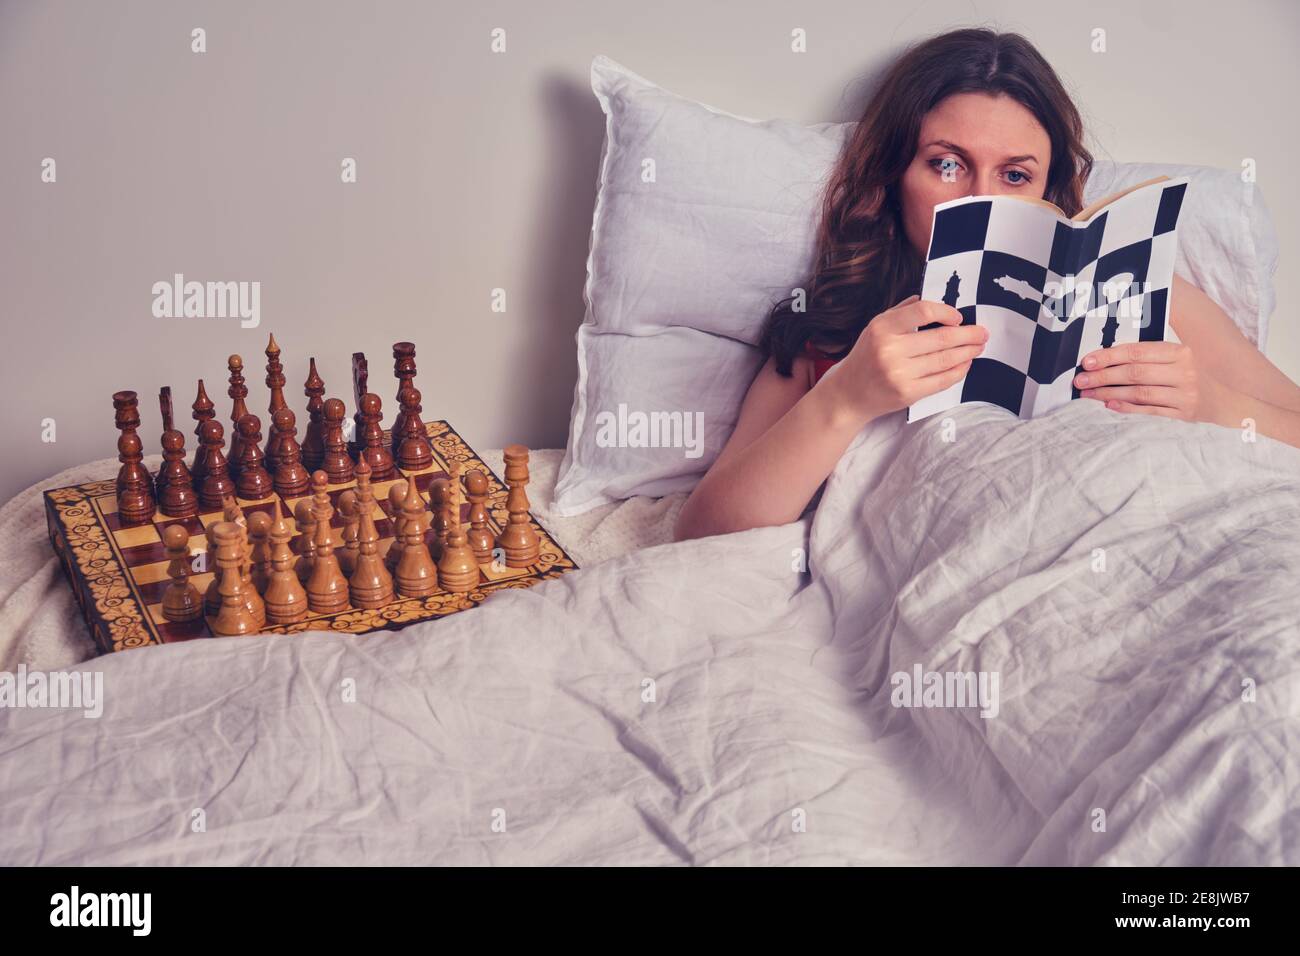 A woman reads a chess book at night on the bed next to the chessboard. Stock Photo